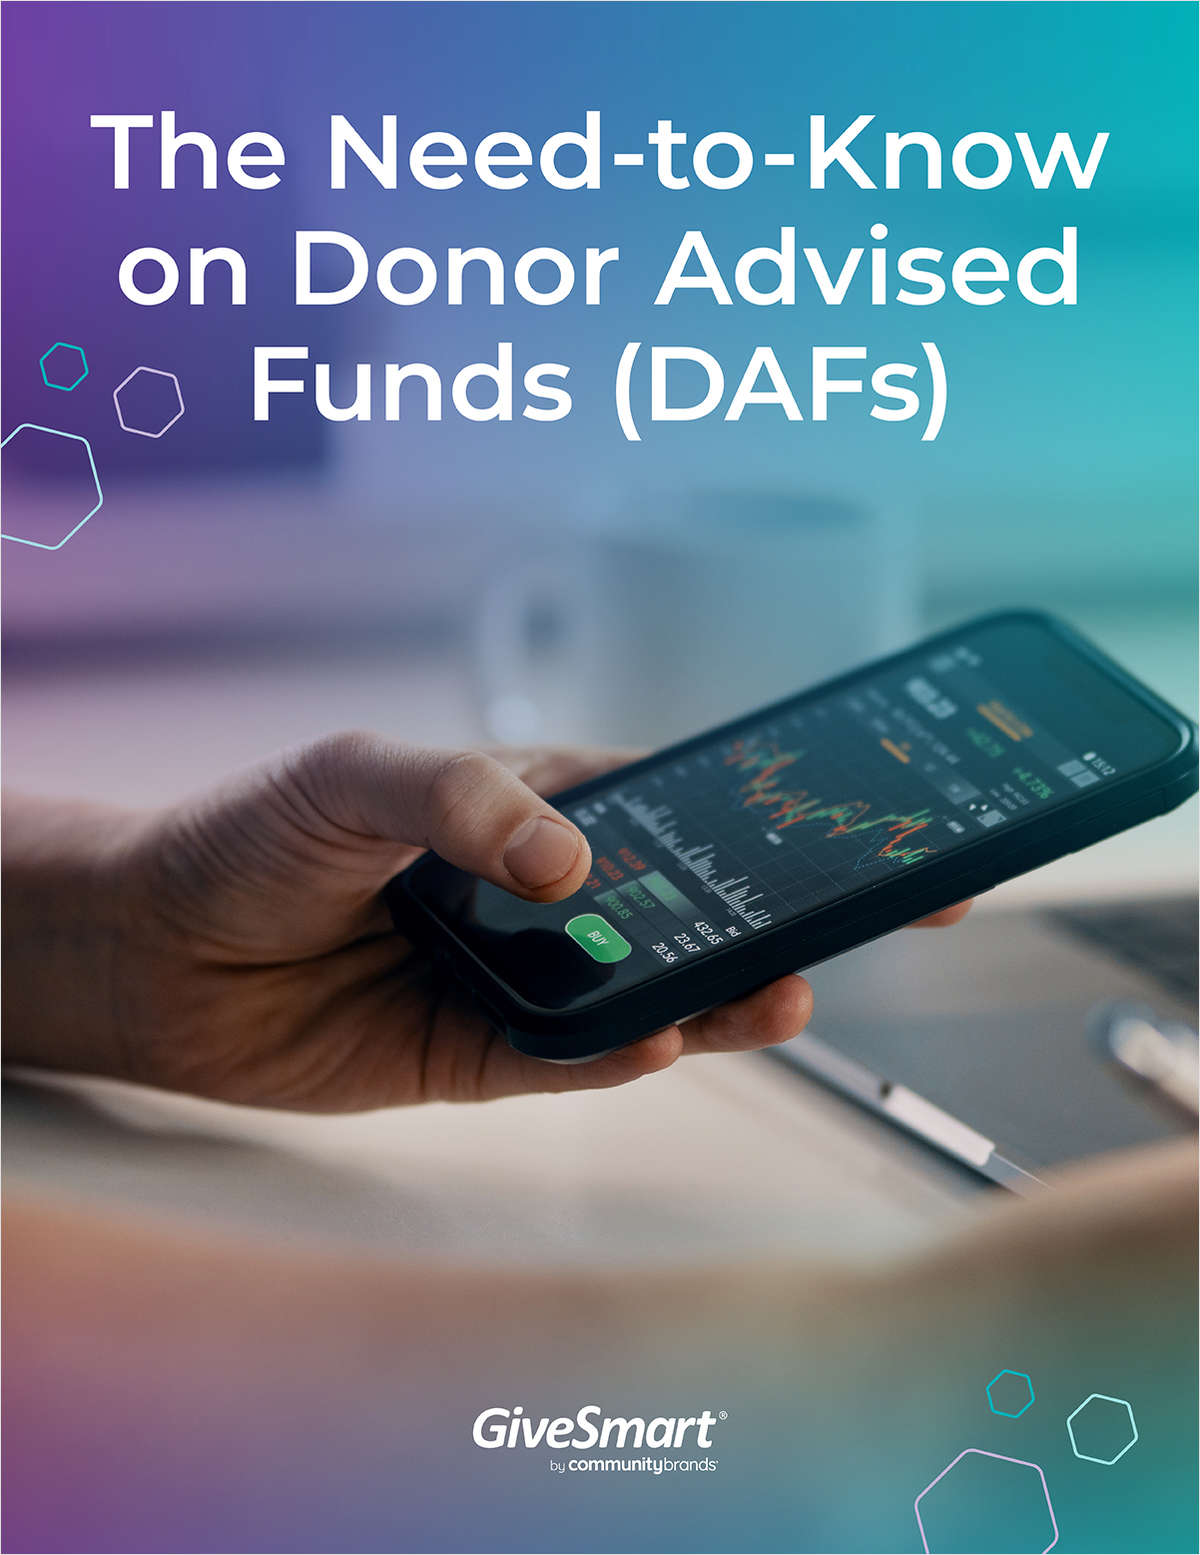 The Need-to-Know on Donor Advised Funds (DAFs)